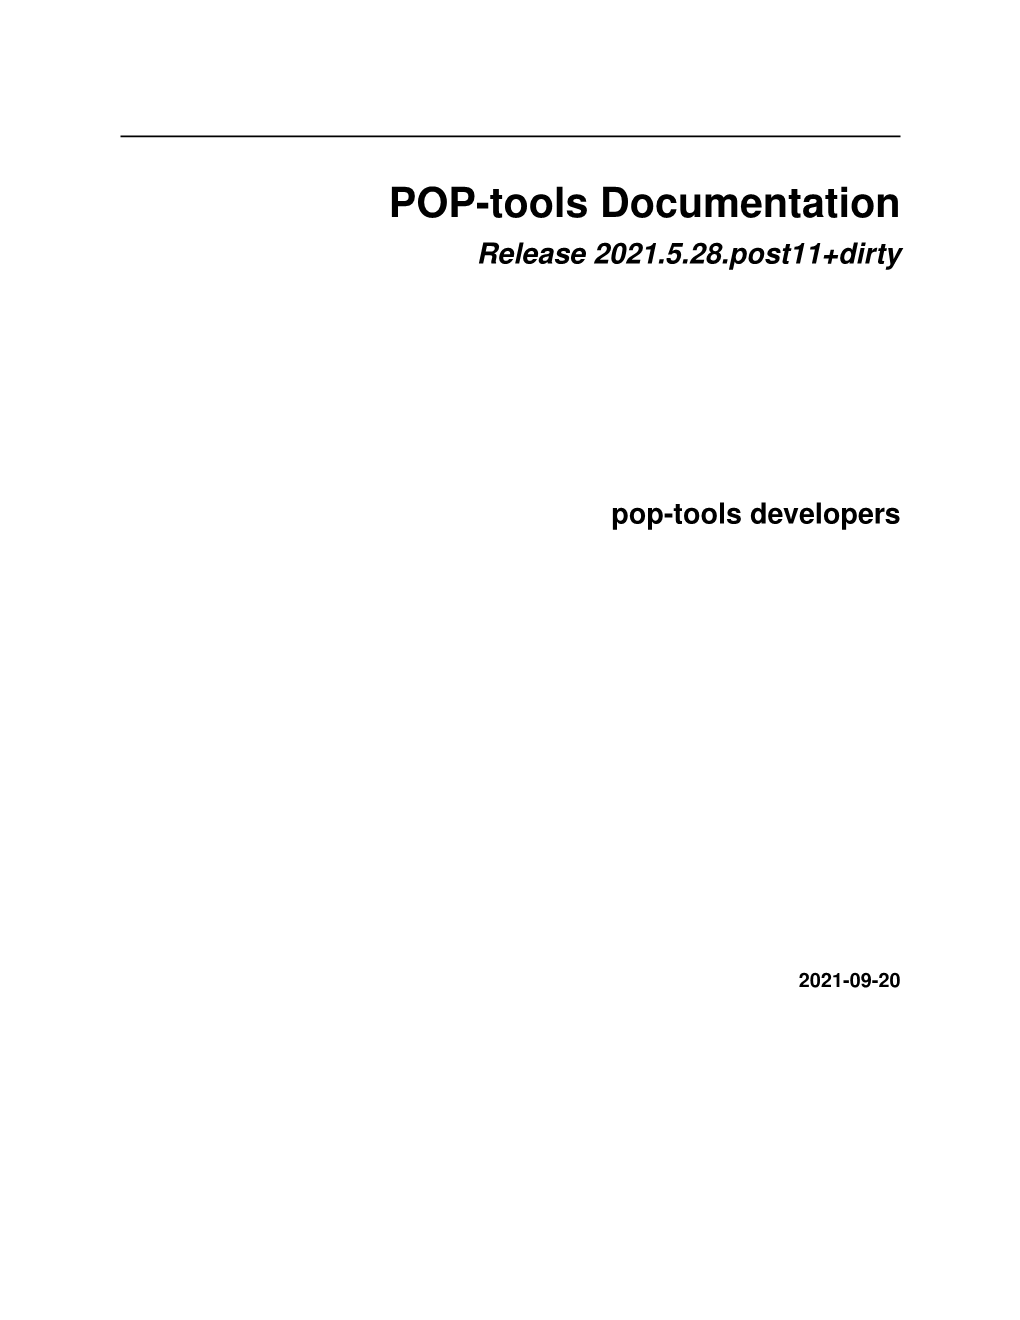 POP-Tools Documentation Release 2021.5.28.Post11+Dirty